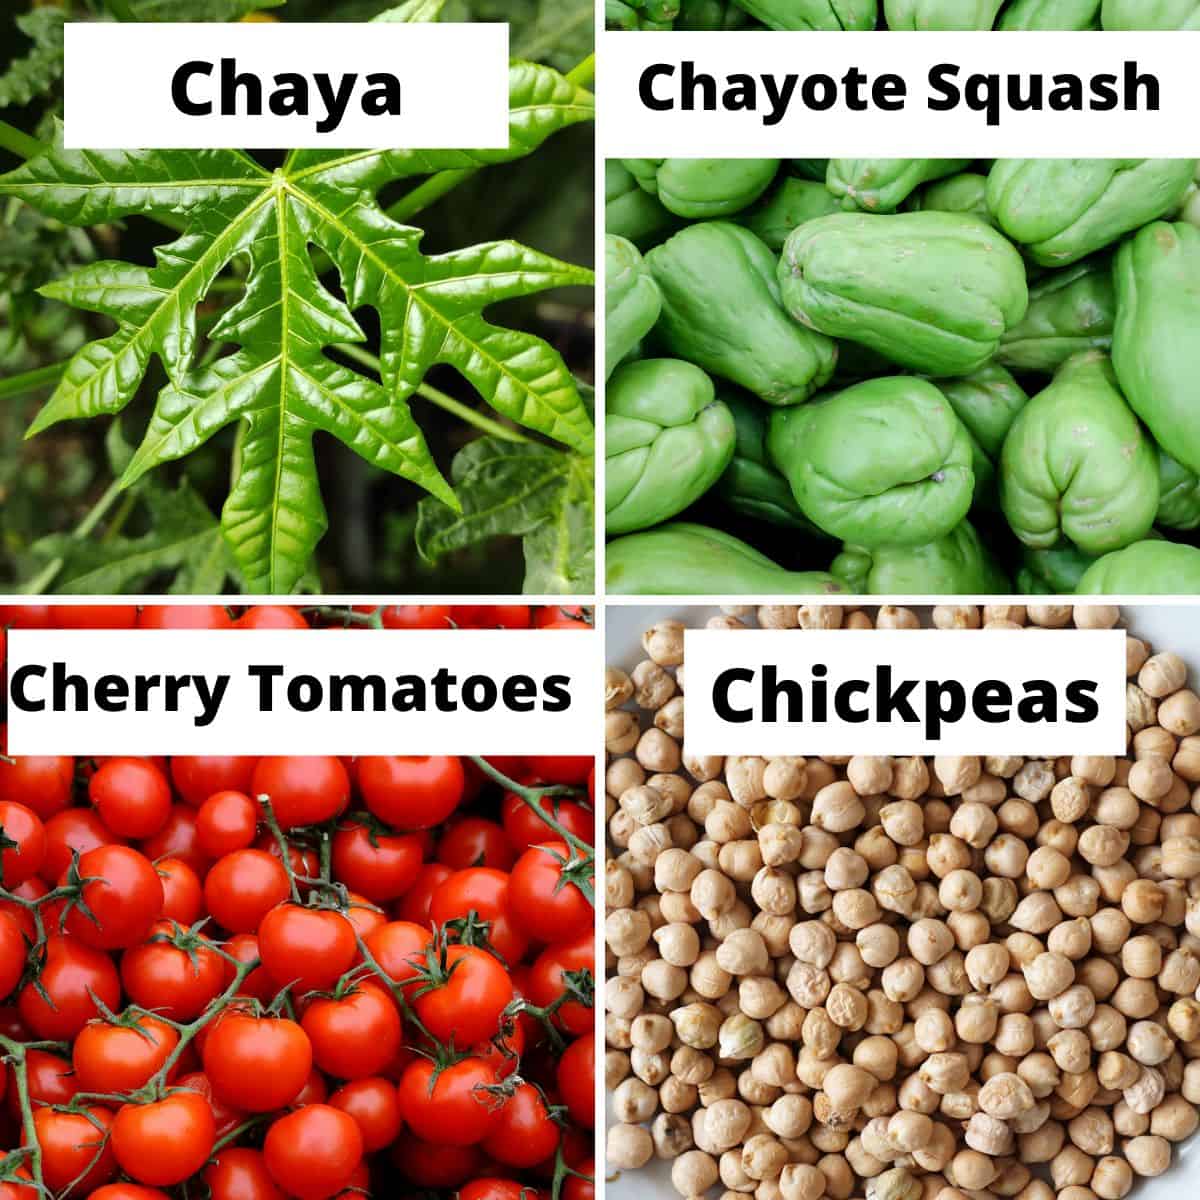 Vegetables that Start with C: chaya, chayote, cherry tomatoes, chickpeas.
